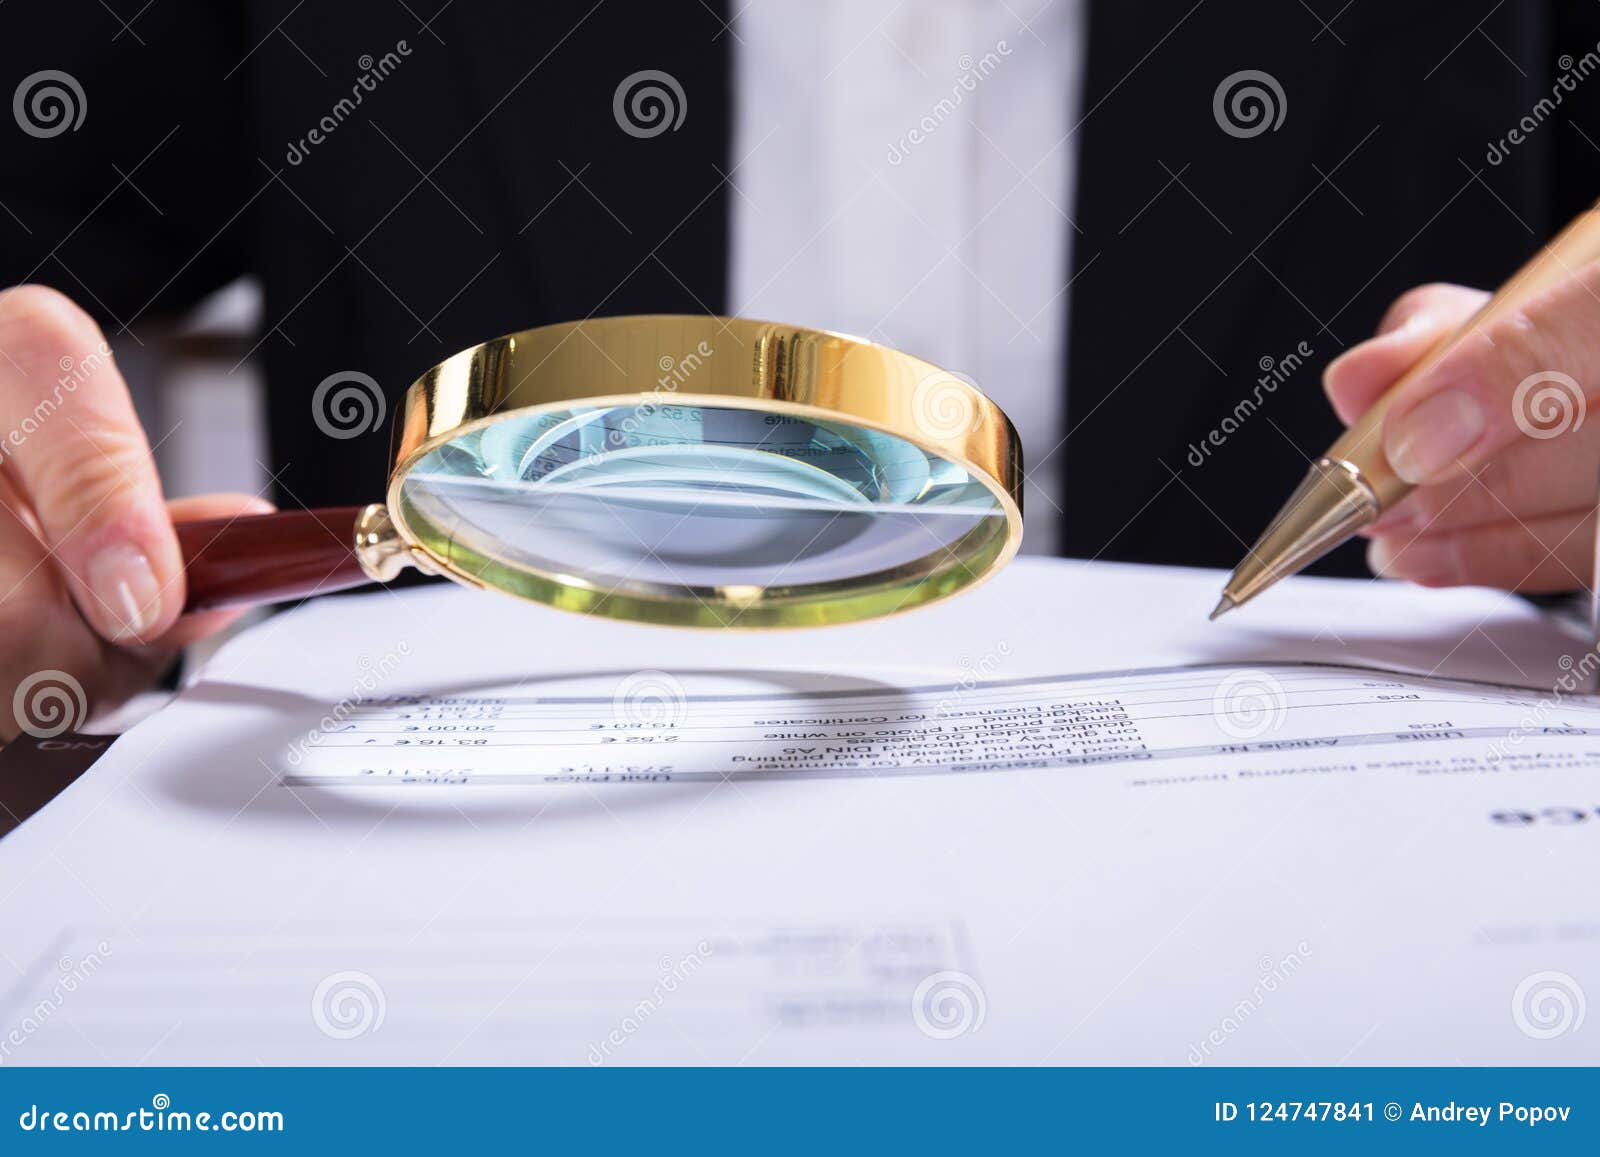 auditor inspecting financial documents at desk